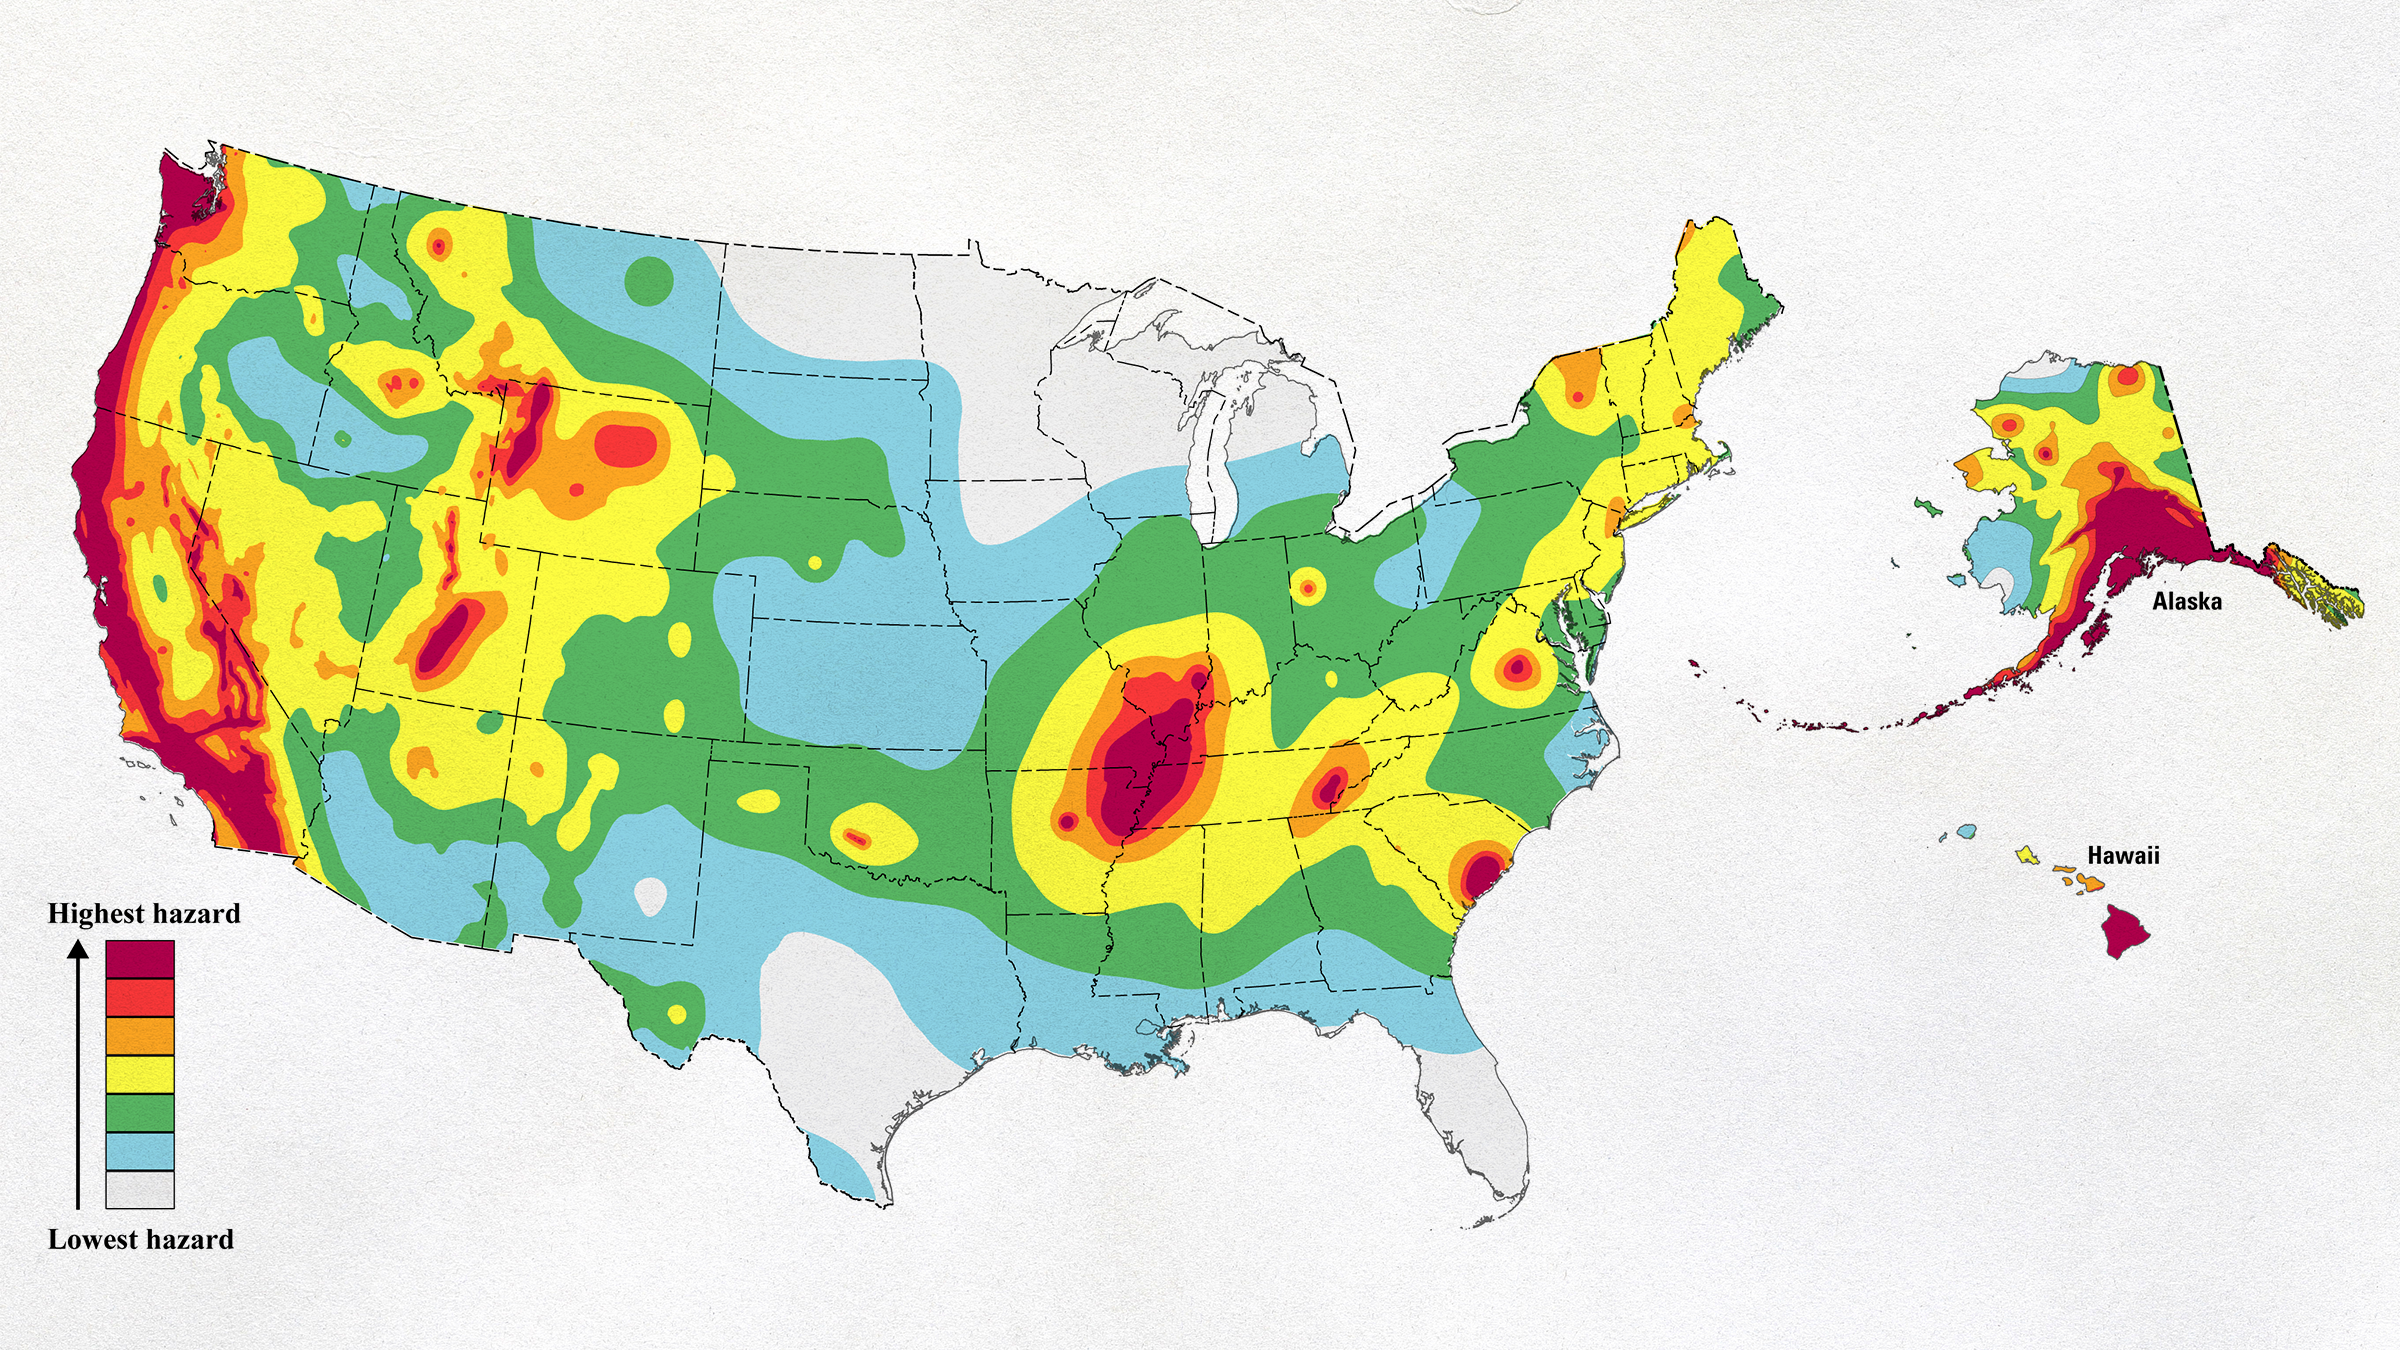 How threatened by earthquakes are U.S. communities? New report gives
answers